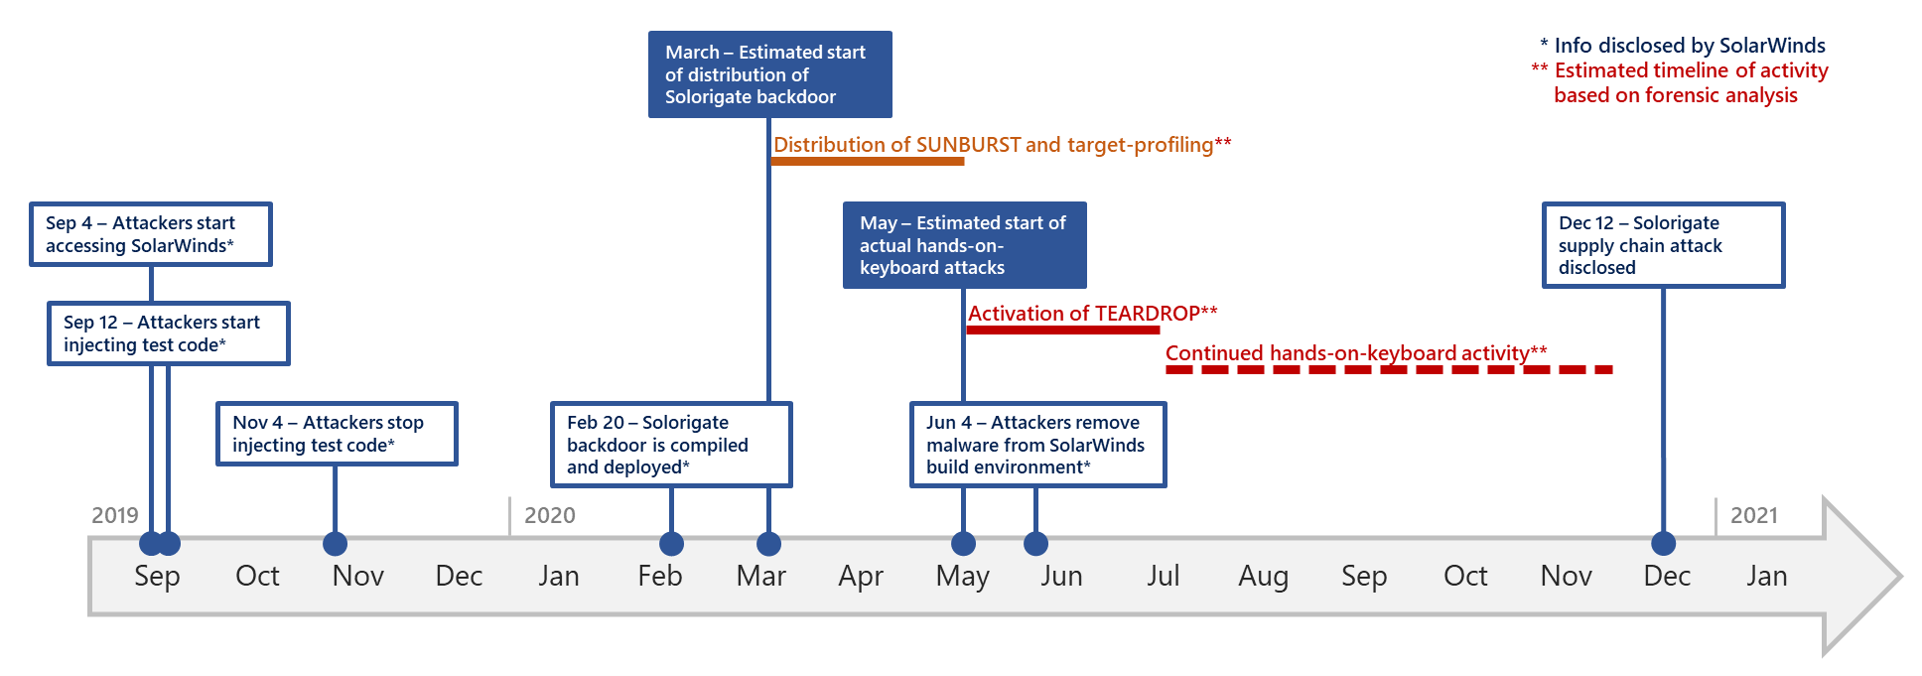 Timeline graph showing developments in the Solorigate attack